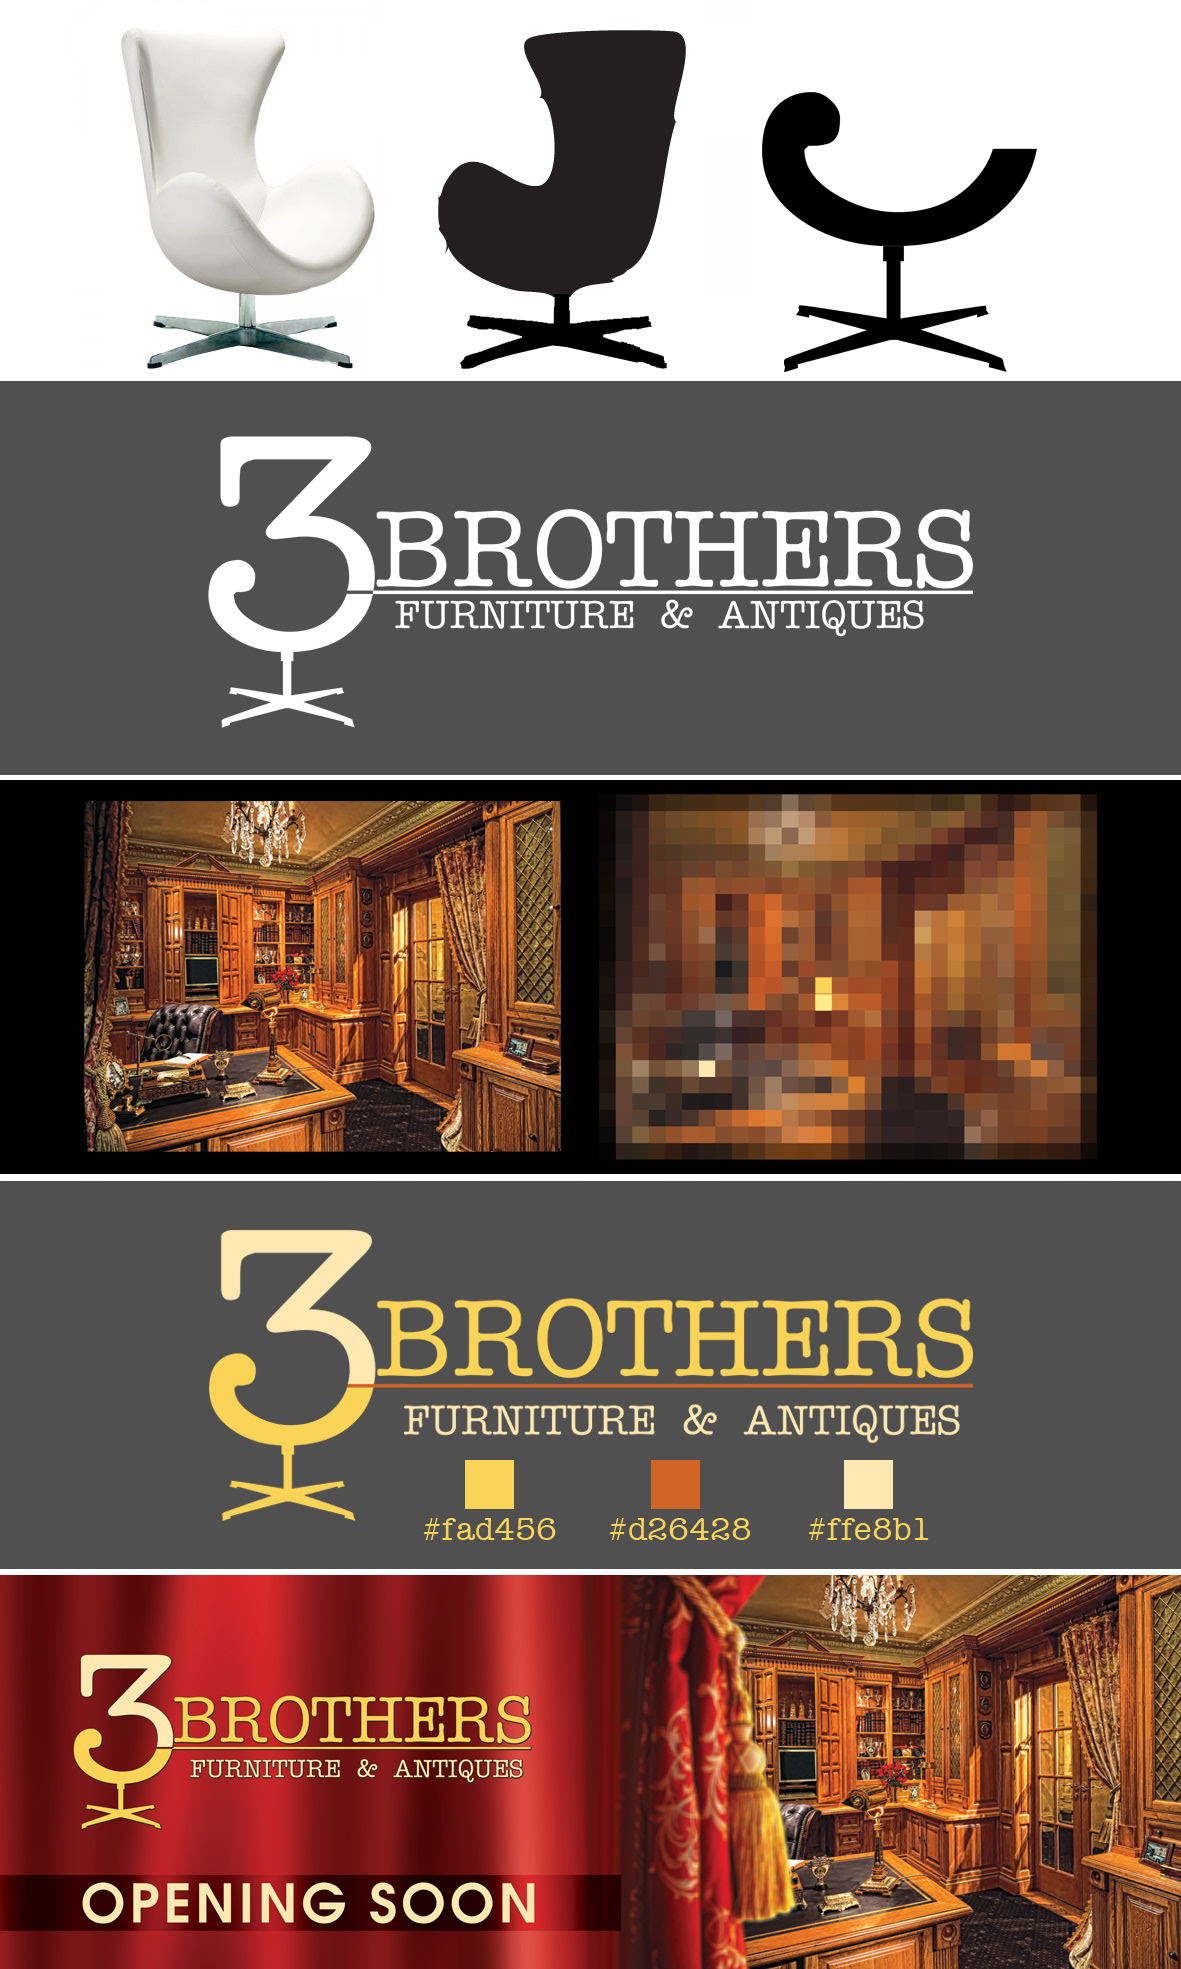 furniture 3 Brothers logo concept Antiques